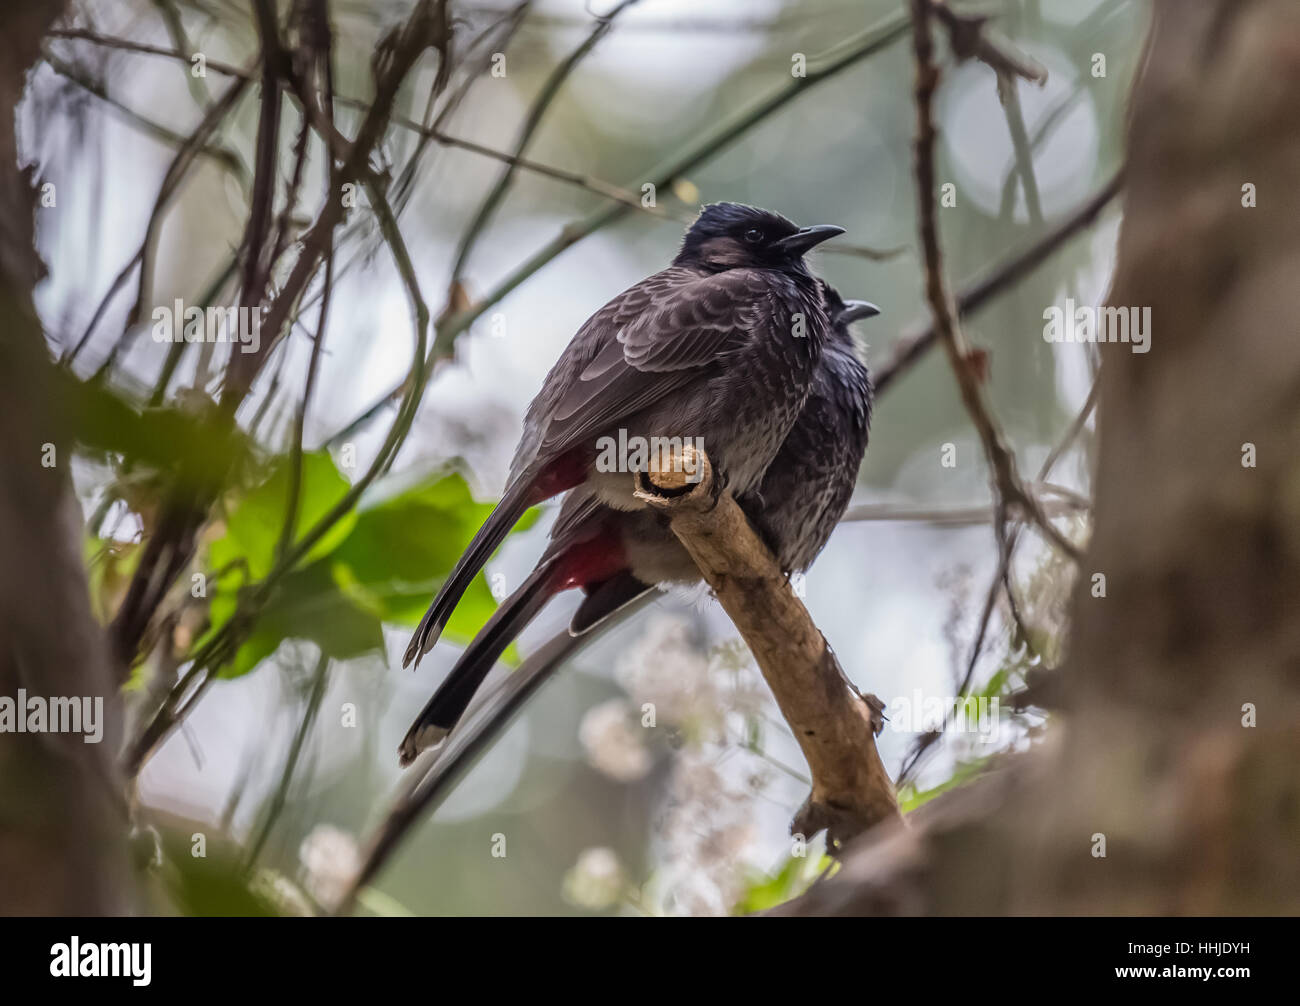 Common Indian birds - The red vented Bulbul pair resting on the stem of a tree. Stock Photo